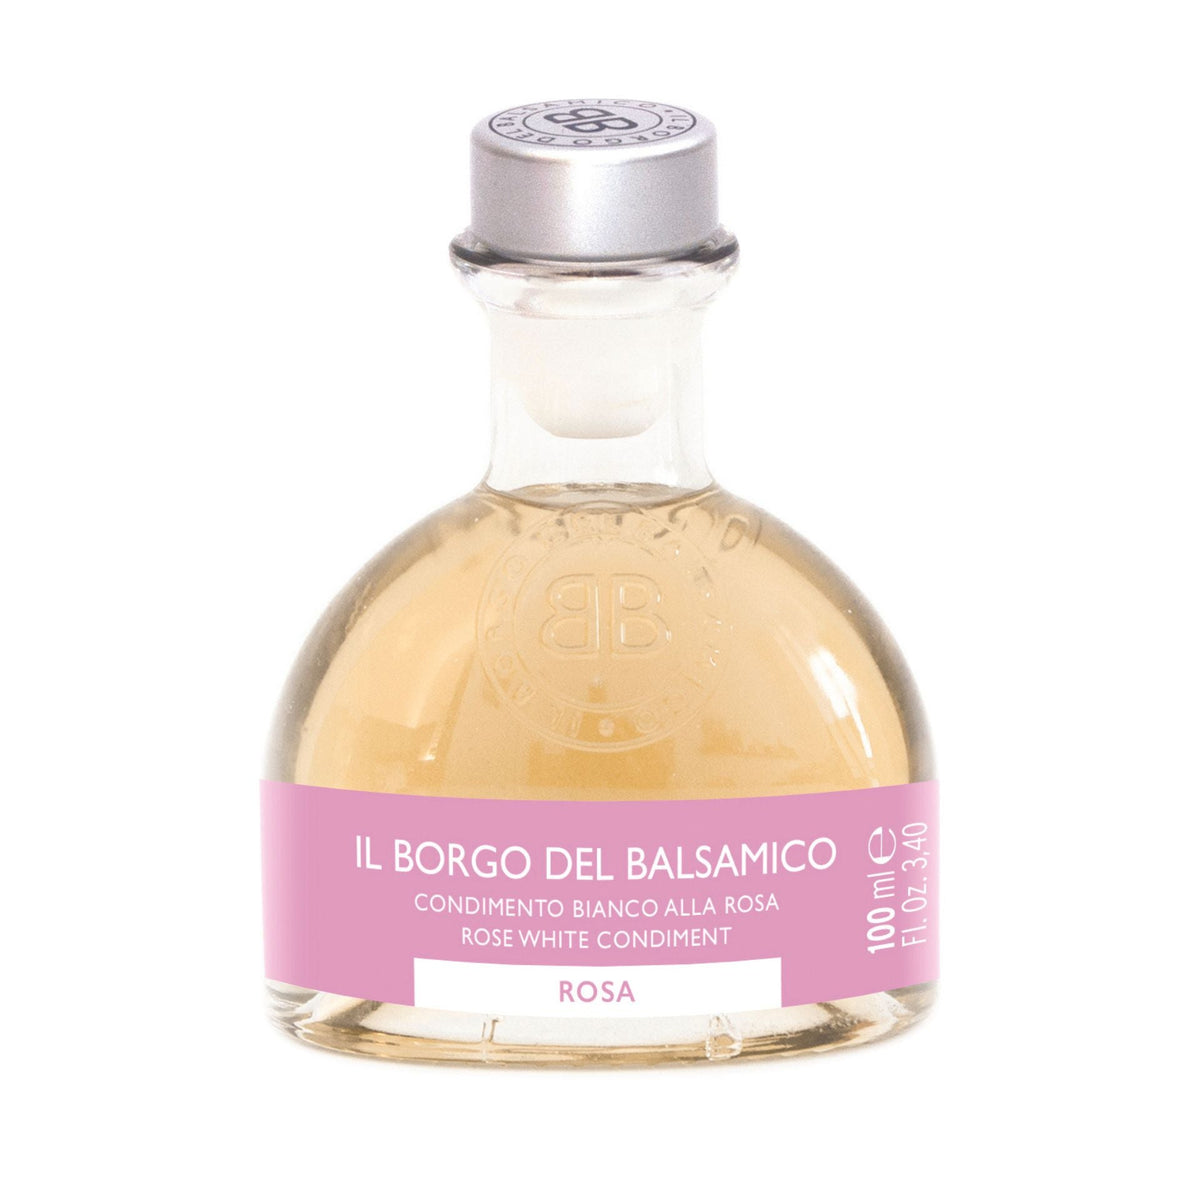 Il Borgo del Balsamico Fruit Condiment with Rose Essence 100ml  | Imported and distributed in the UK by Just Gourmet Foods